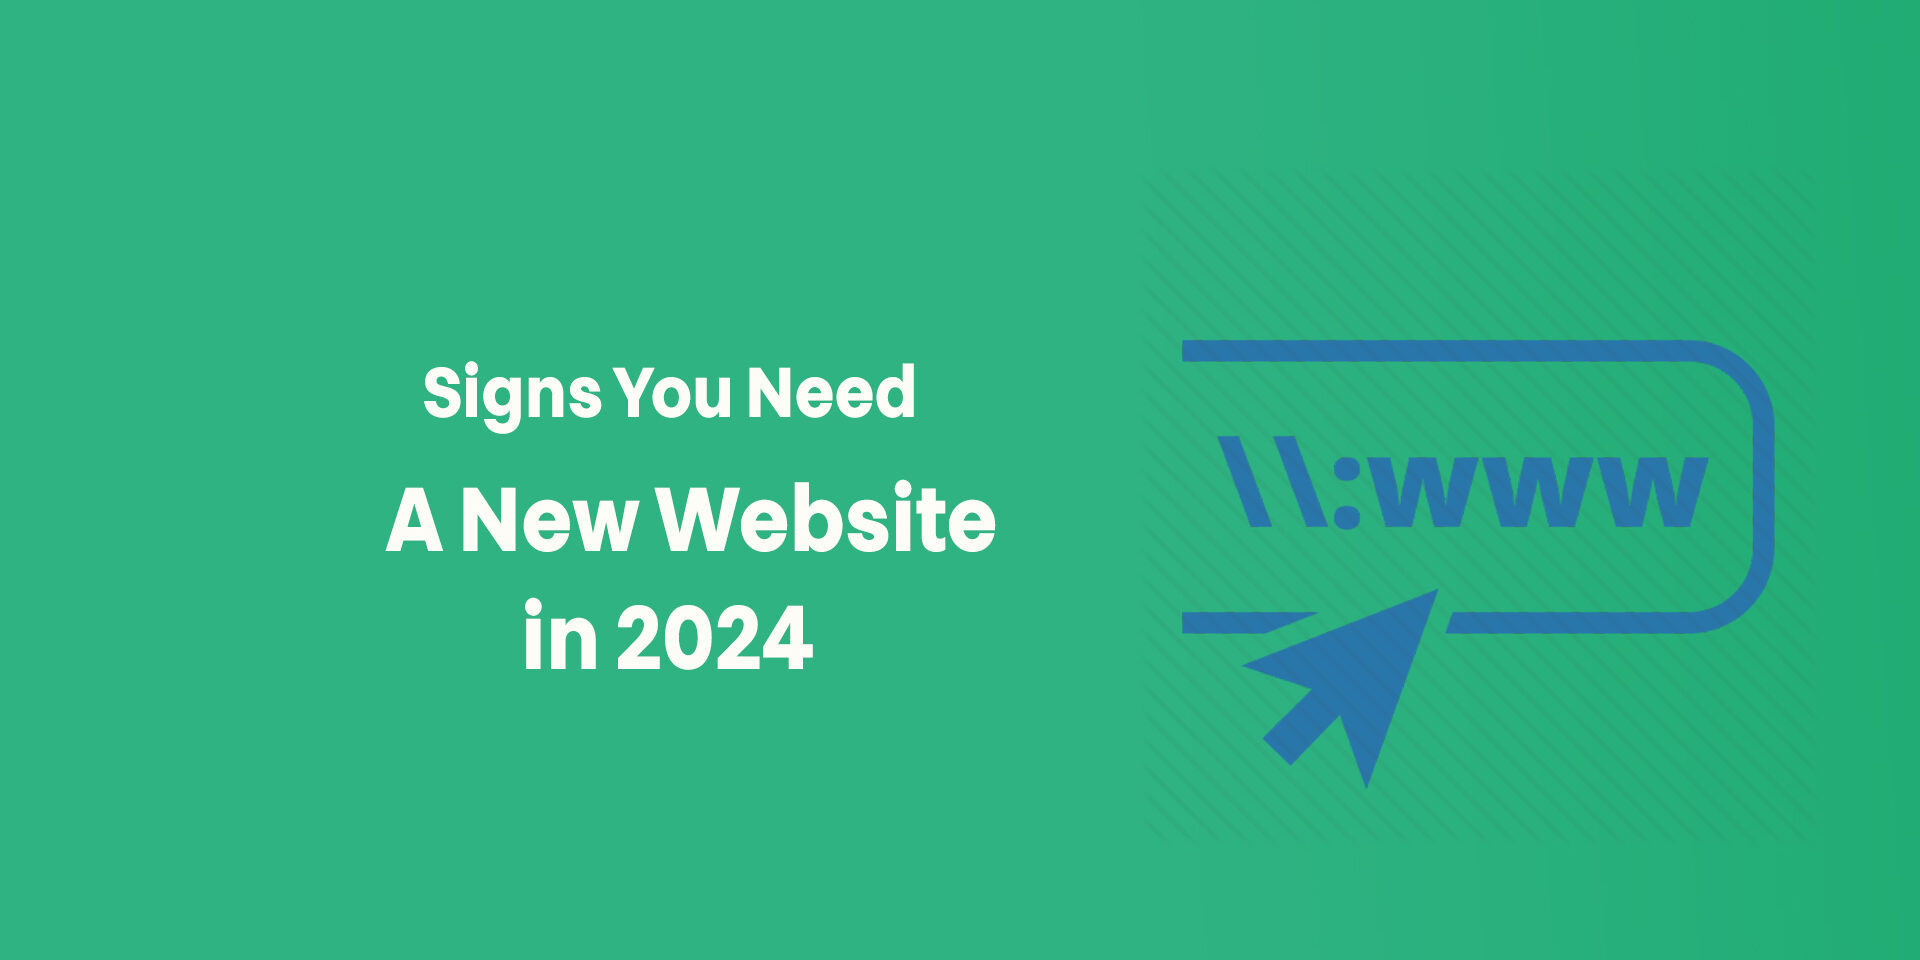 25 Signs You Need a New Website in 2024